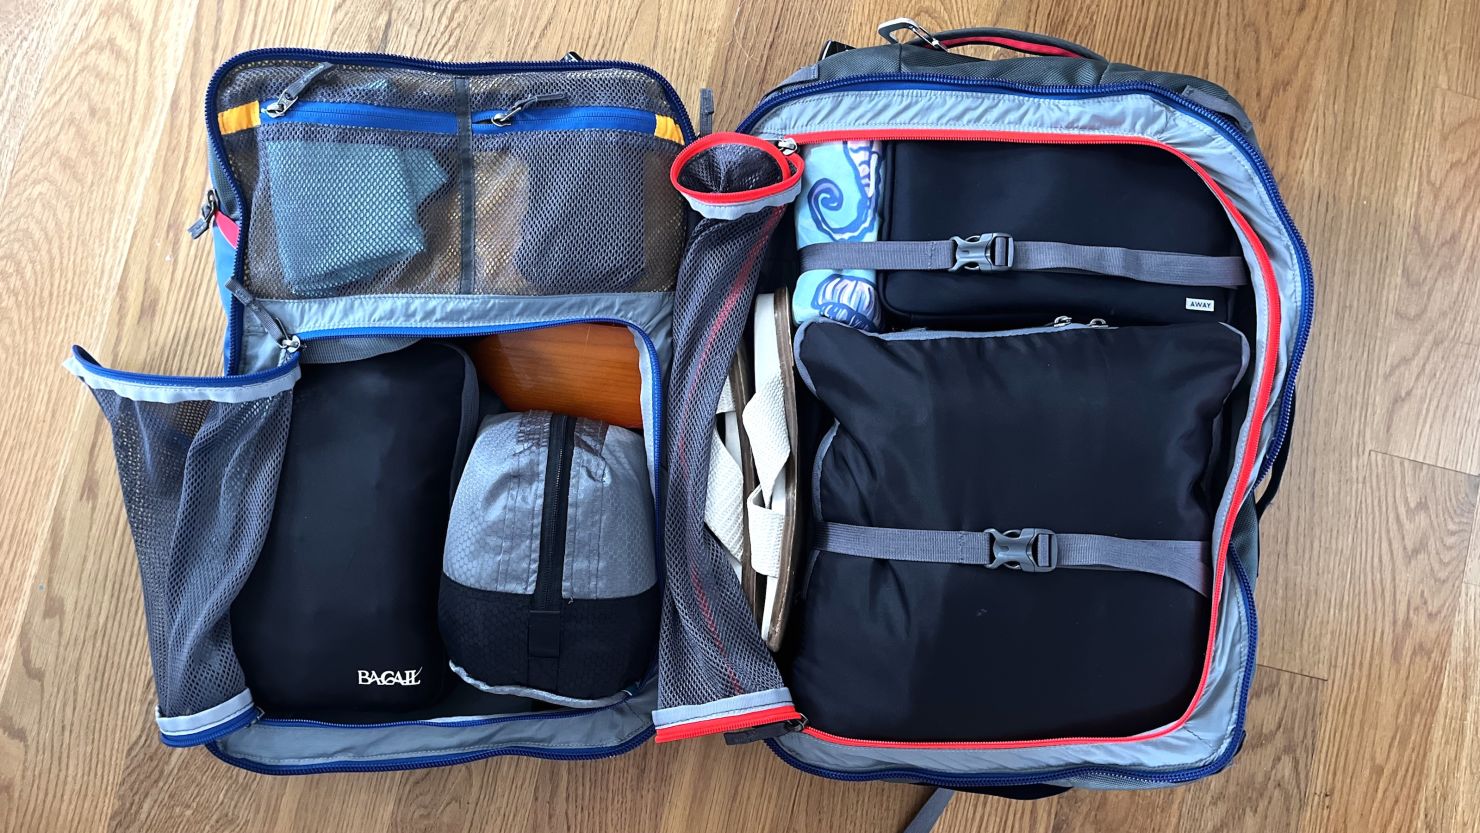 Best Gear for Travel with Kids - Pack More Into Life